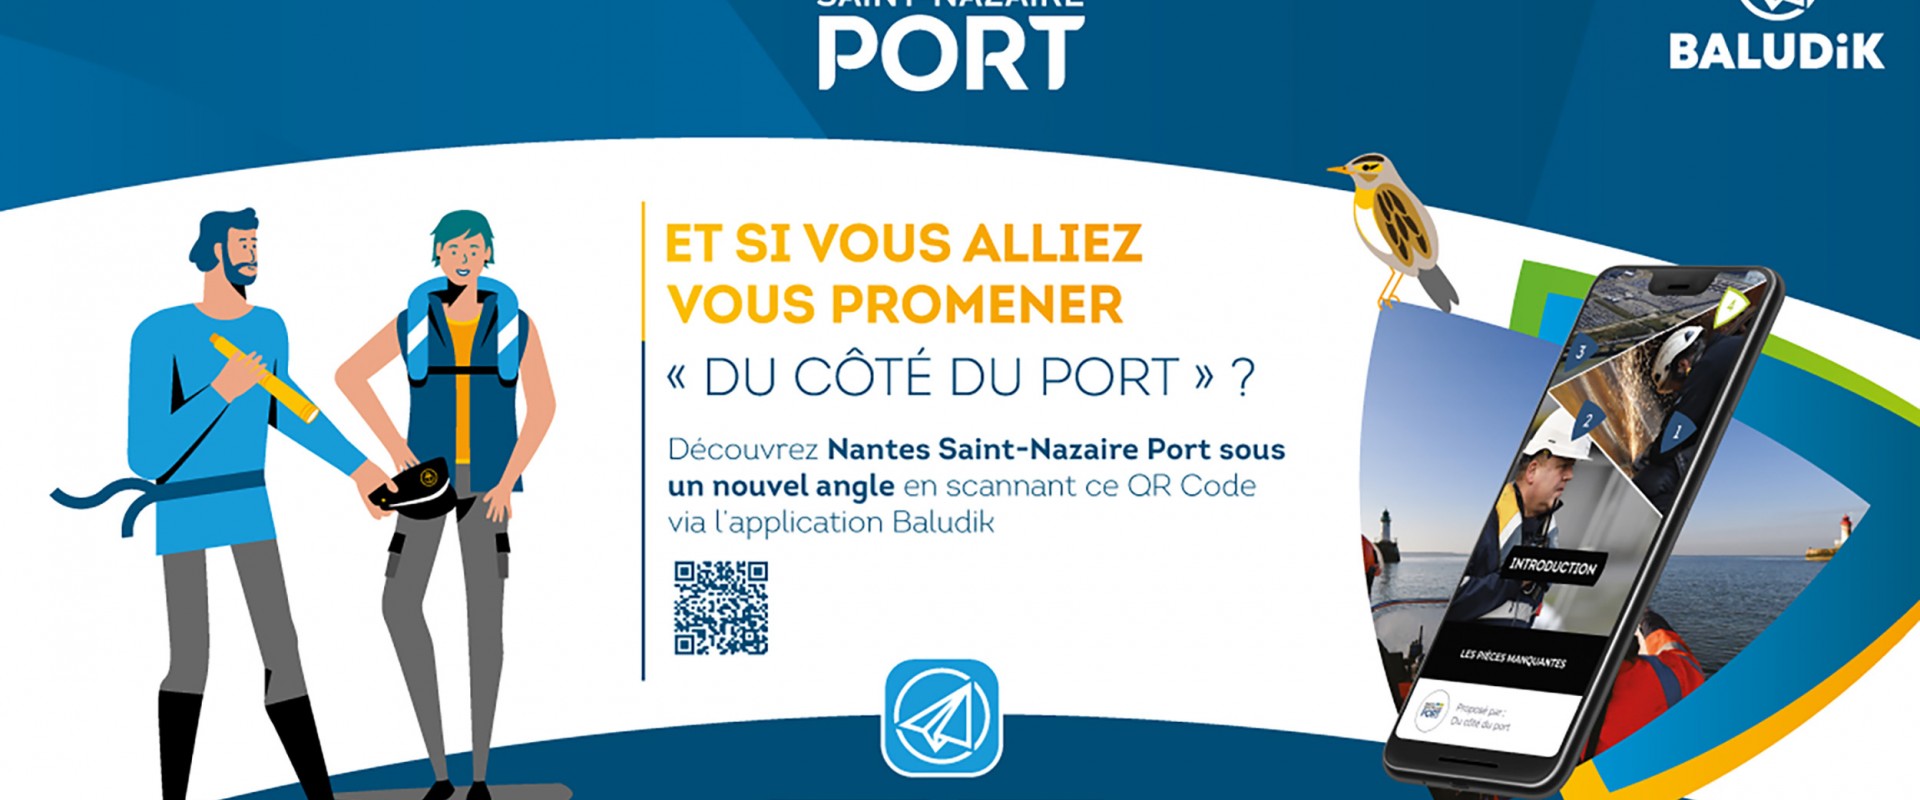 Fun-to-Do, Educational Pathways to (Re)Discover the Port of Nantes ‒ Saint Nazaire